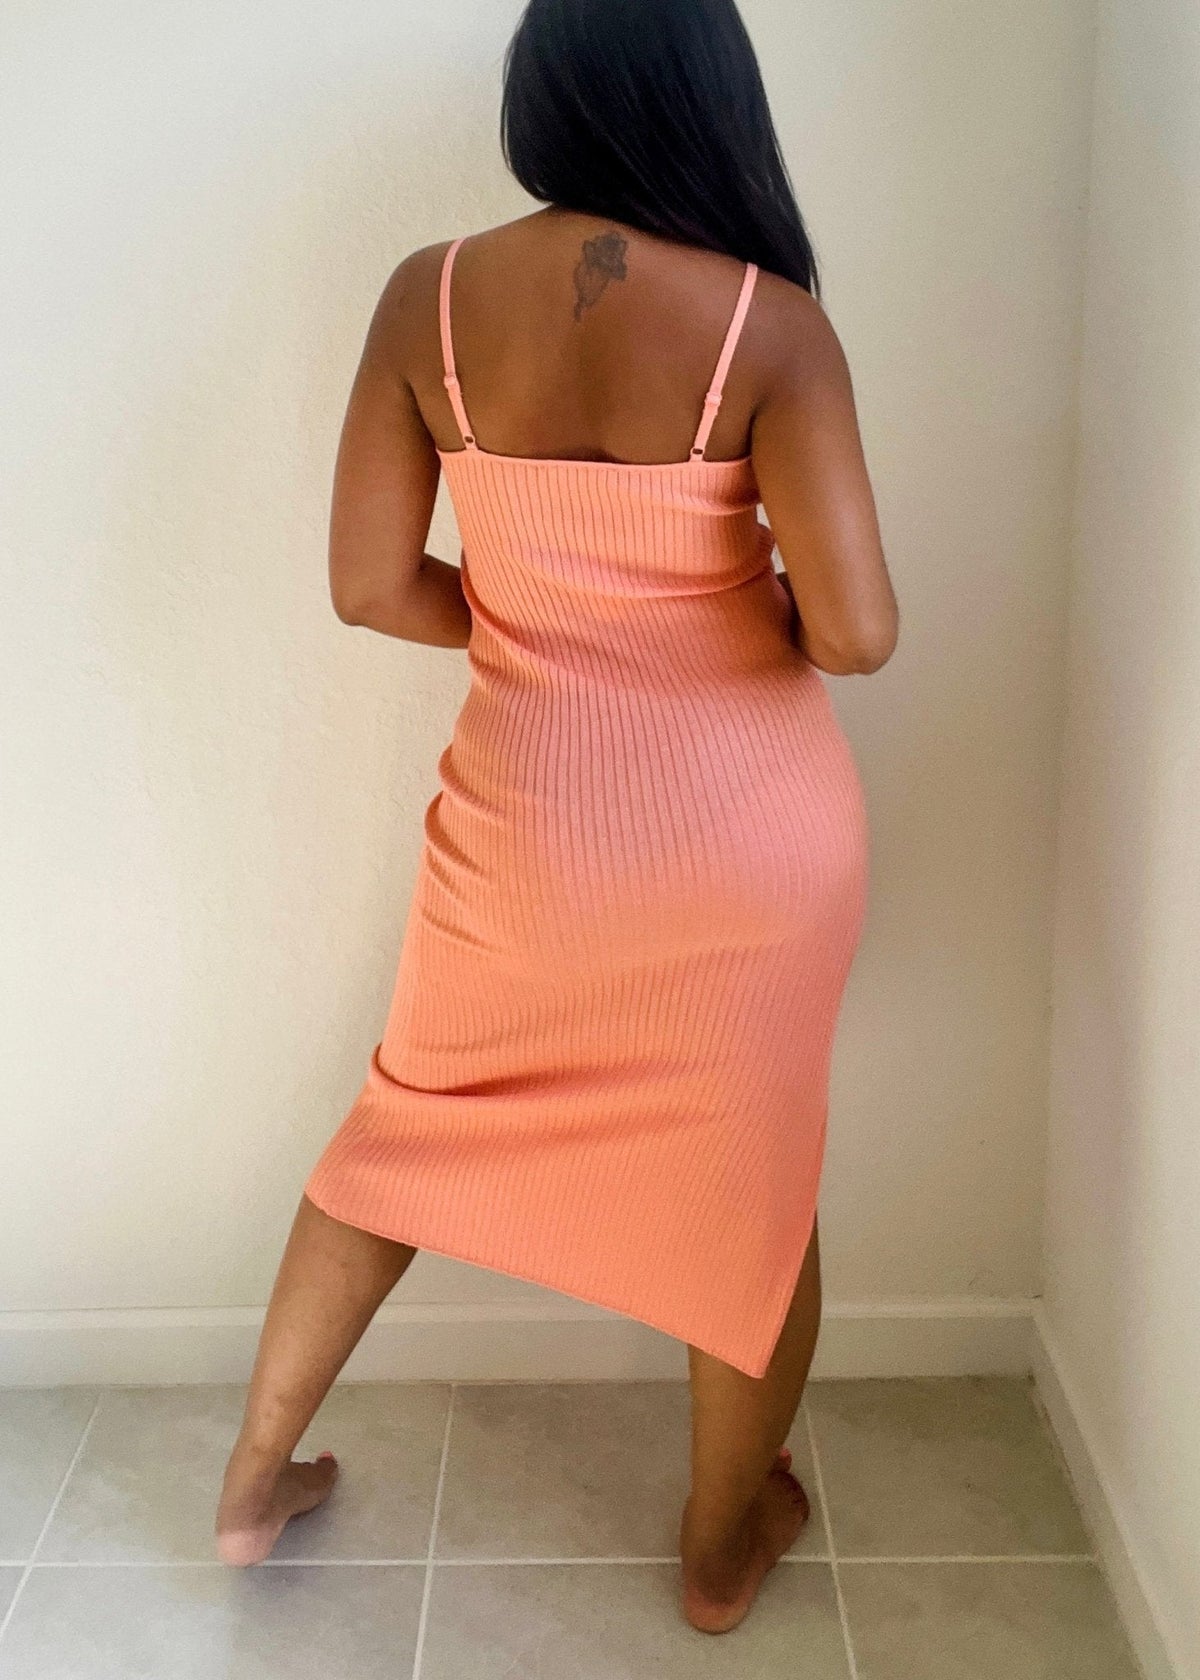 Get trendy with Basic Ribbed Dress - Dresses available at ELLE TENAJ. Grab yours for $15 today!